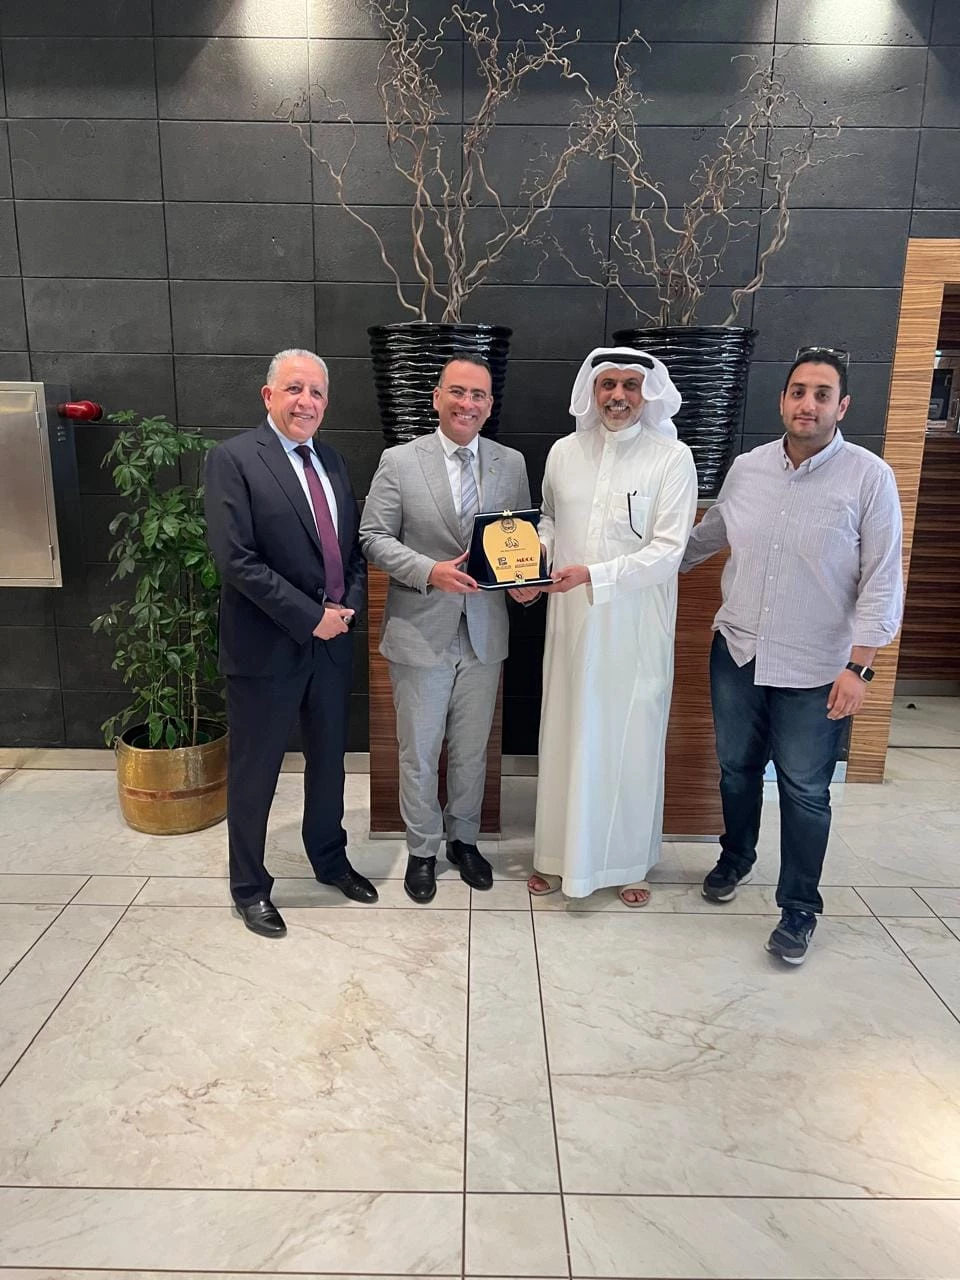 Visit of the Dean of Port Training Institute and Research and Consultation Center for the Maritime Transport Sector, AASTMT to King Abdulaziz Port in Dammam, Saudi Arabia3